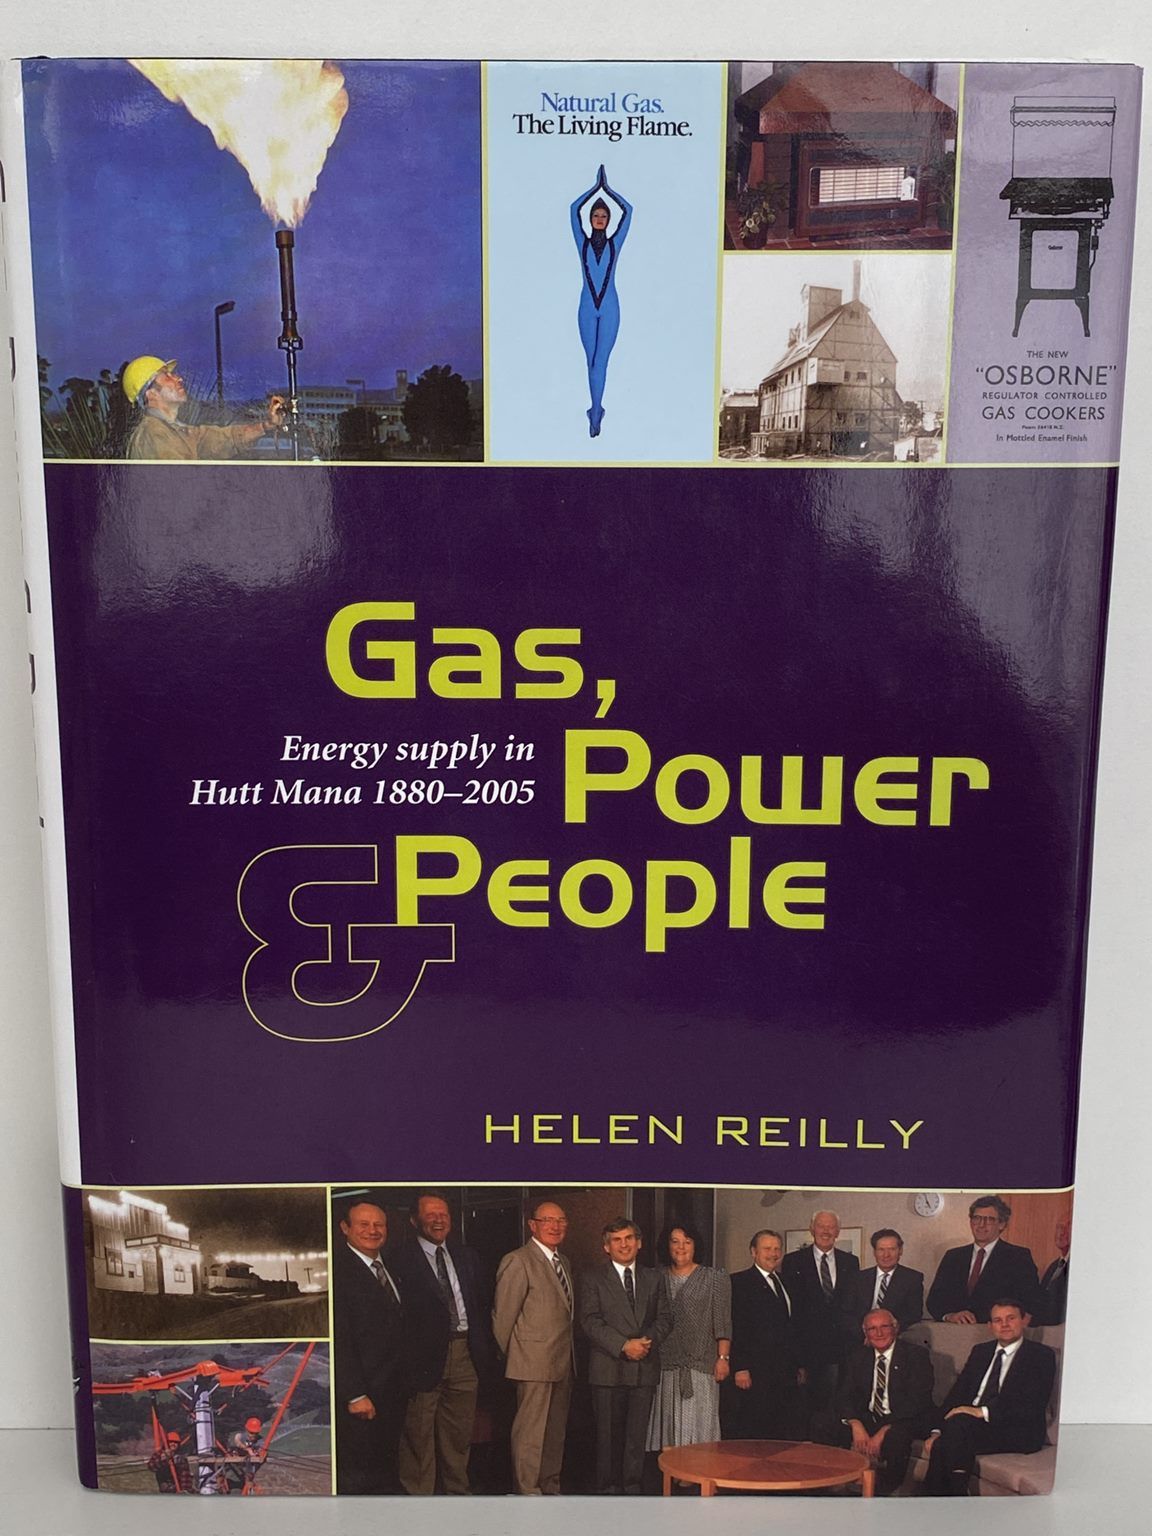 GAS, POWER, PEOPLE: Energy supply in Hutt Mana 1880-2005